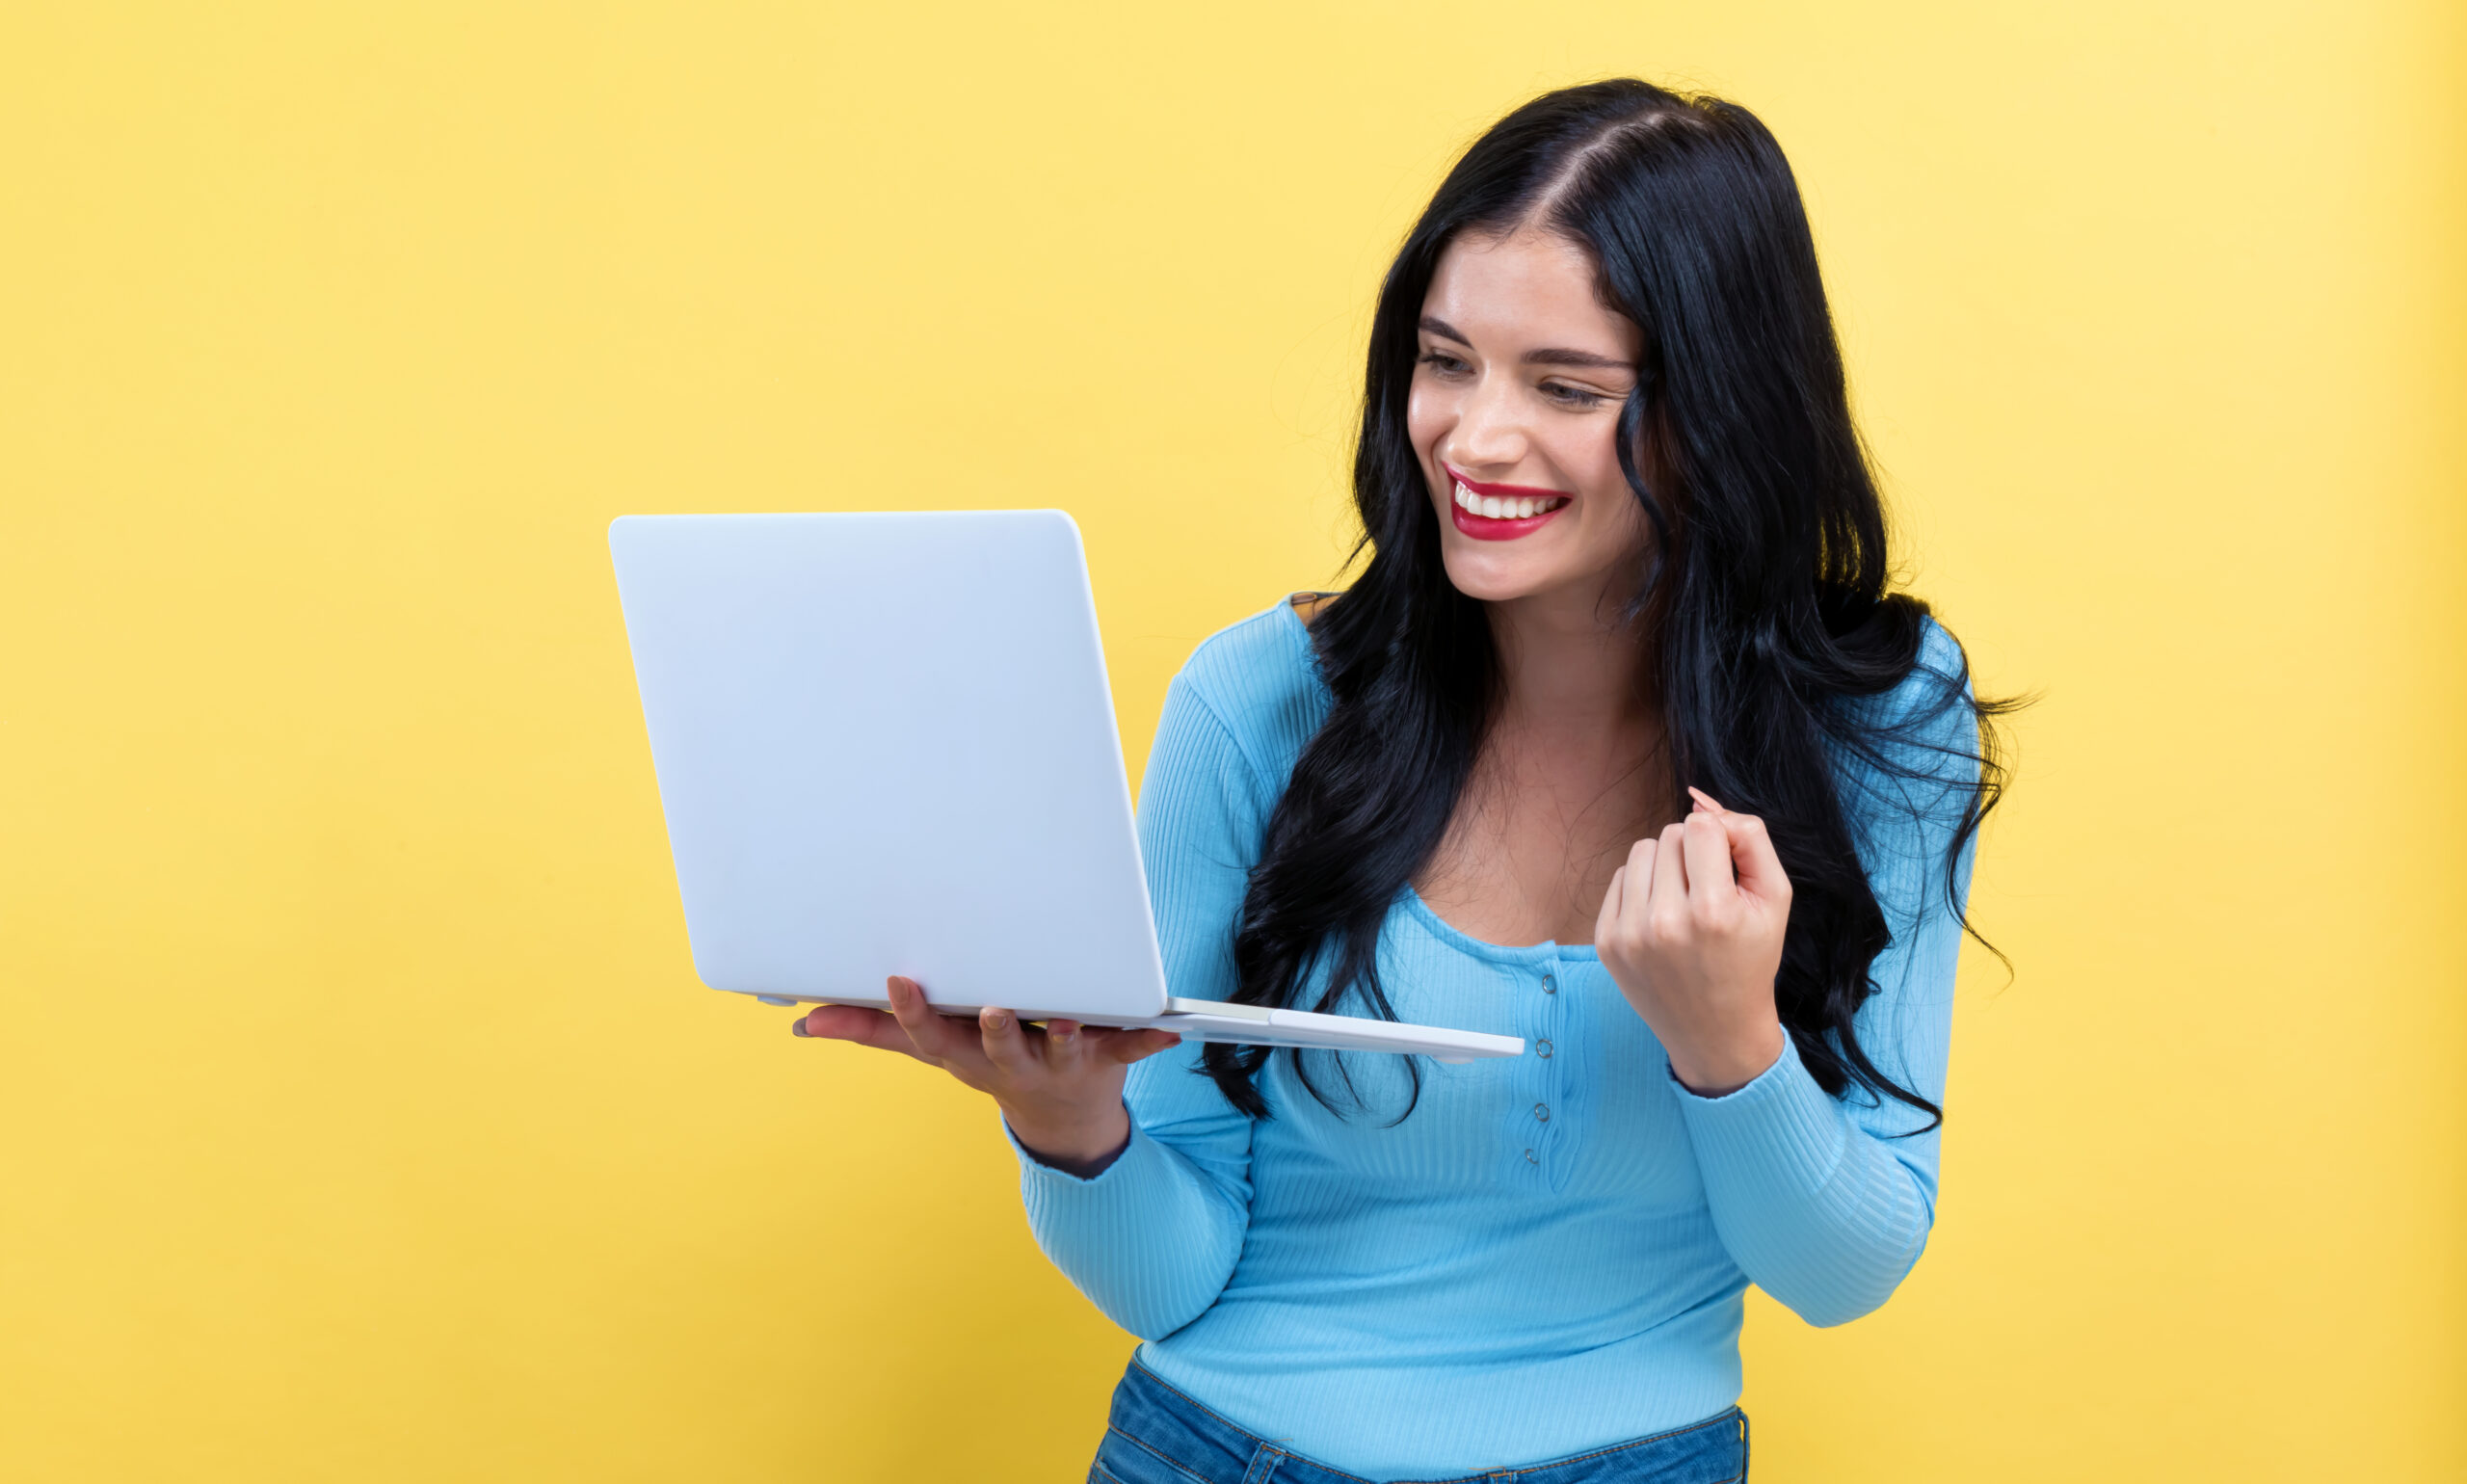 Young,Woman,With,A,Laptop,Computer,With,Successful,Pose,On